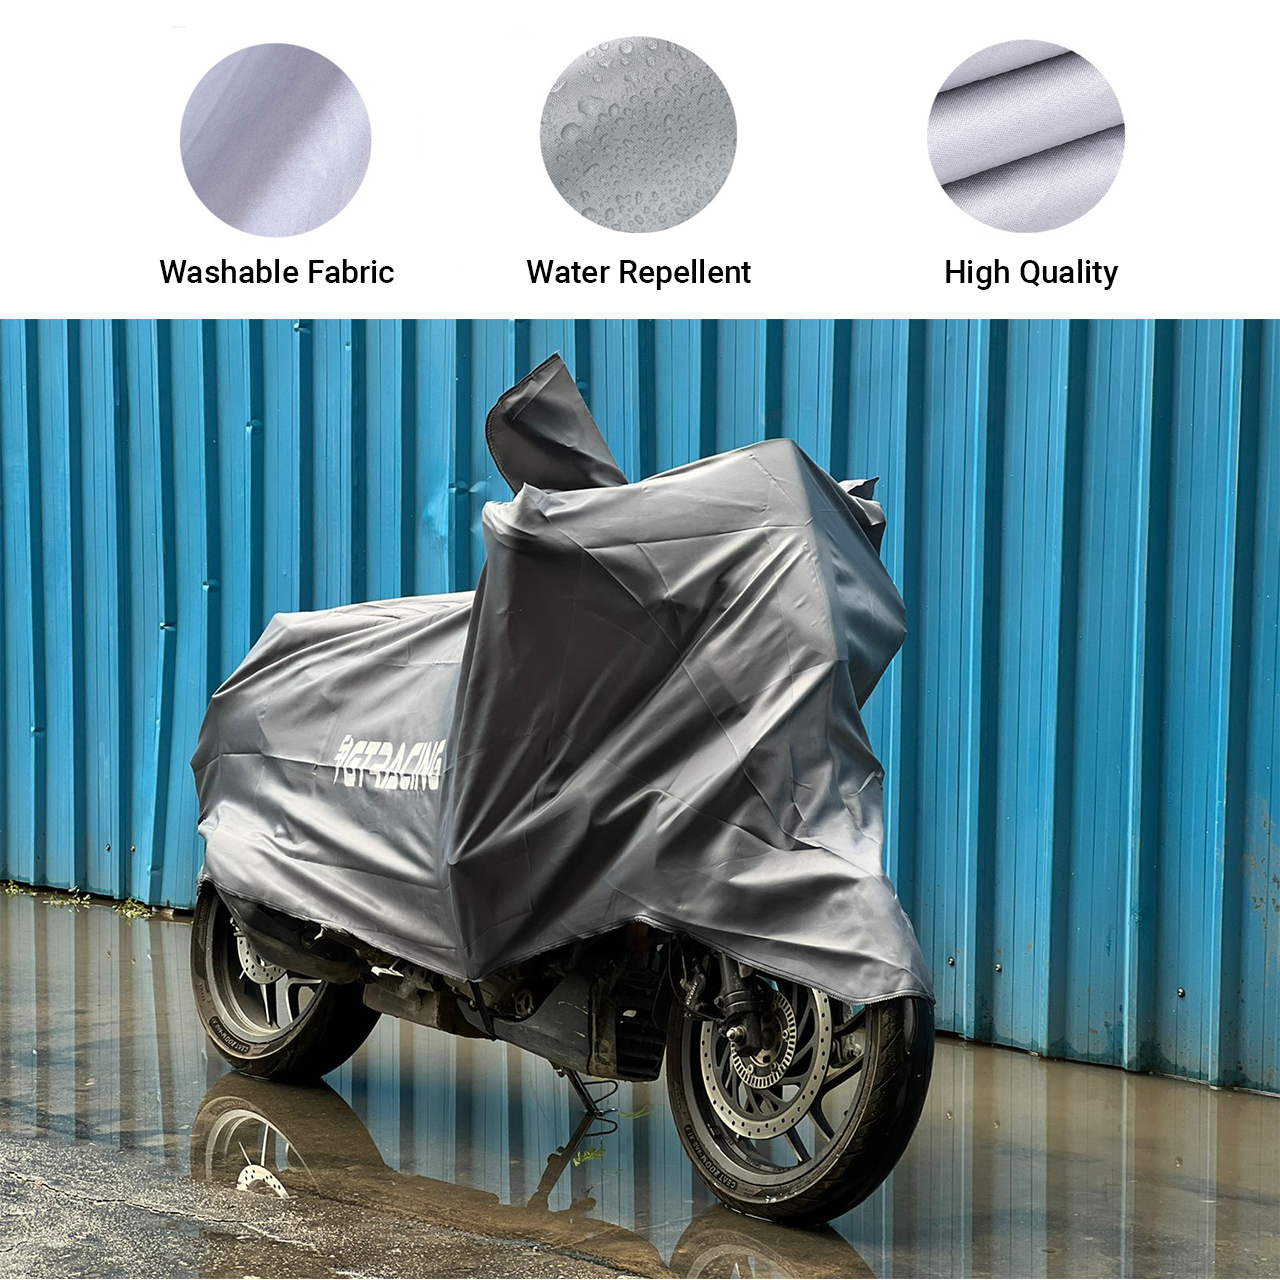 Steelbird Bike Cover GT Racing UV Protection Water-Resistant & Dustproof (Silver Matty), Bike Body Cover With Carry Bag (All Bikes Upto Pulsar 180cc Size)